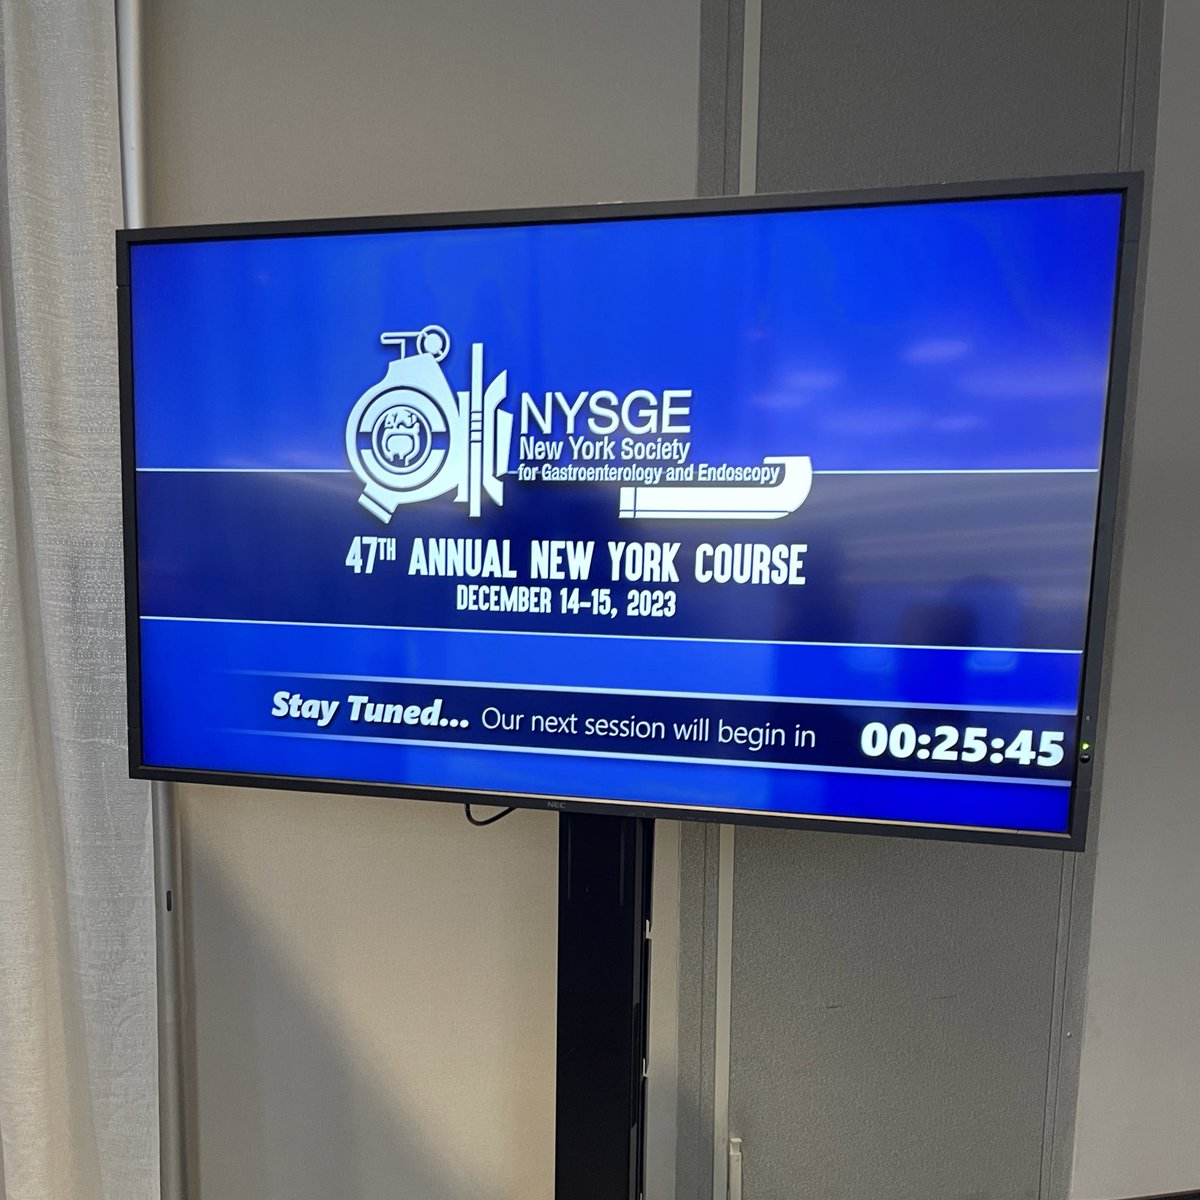 Join us at the @NYSGE annual New York course happening today and tomorrow! Engage with top-notch speakers and seize the chance to learn about cutting-edge diagnostic and treatment approaches to GI disorders. #GiTwitter #StayInformed